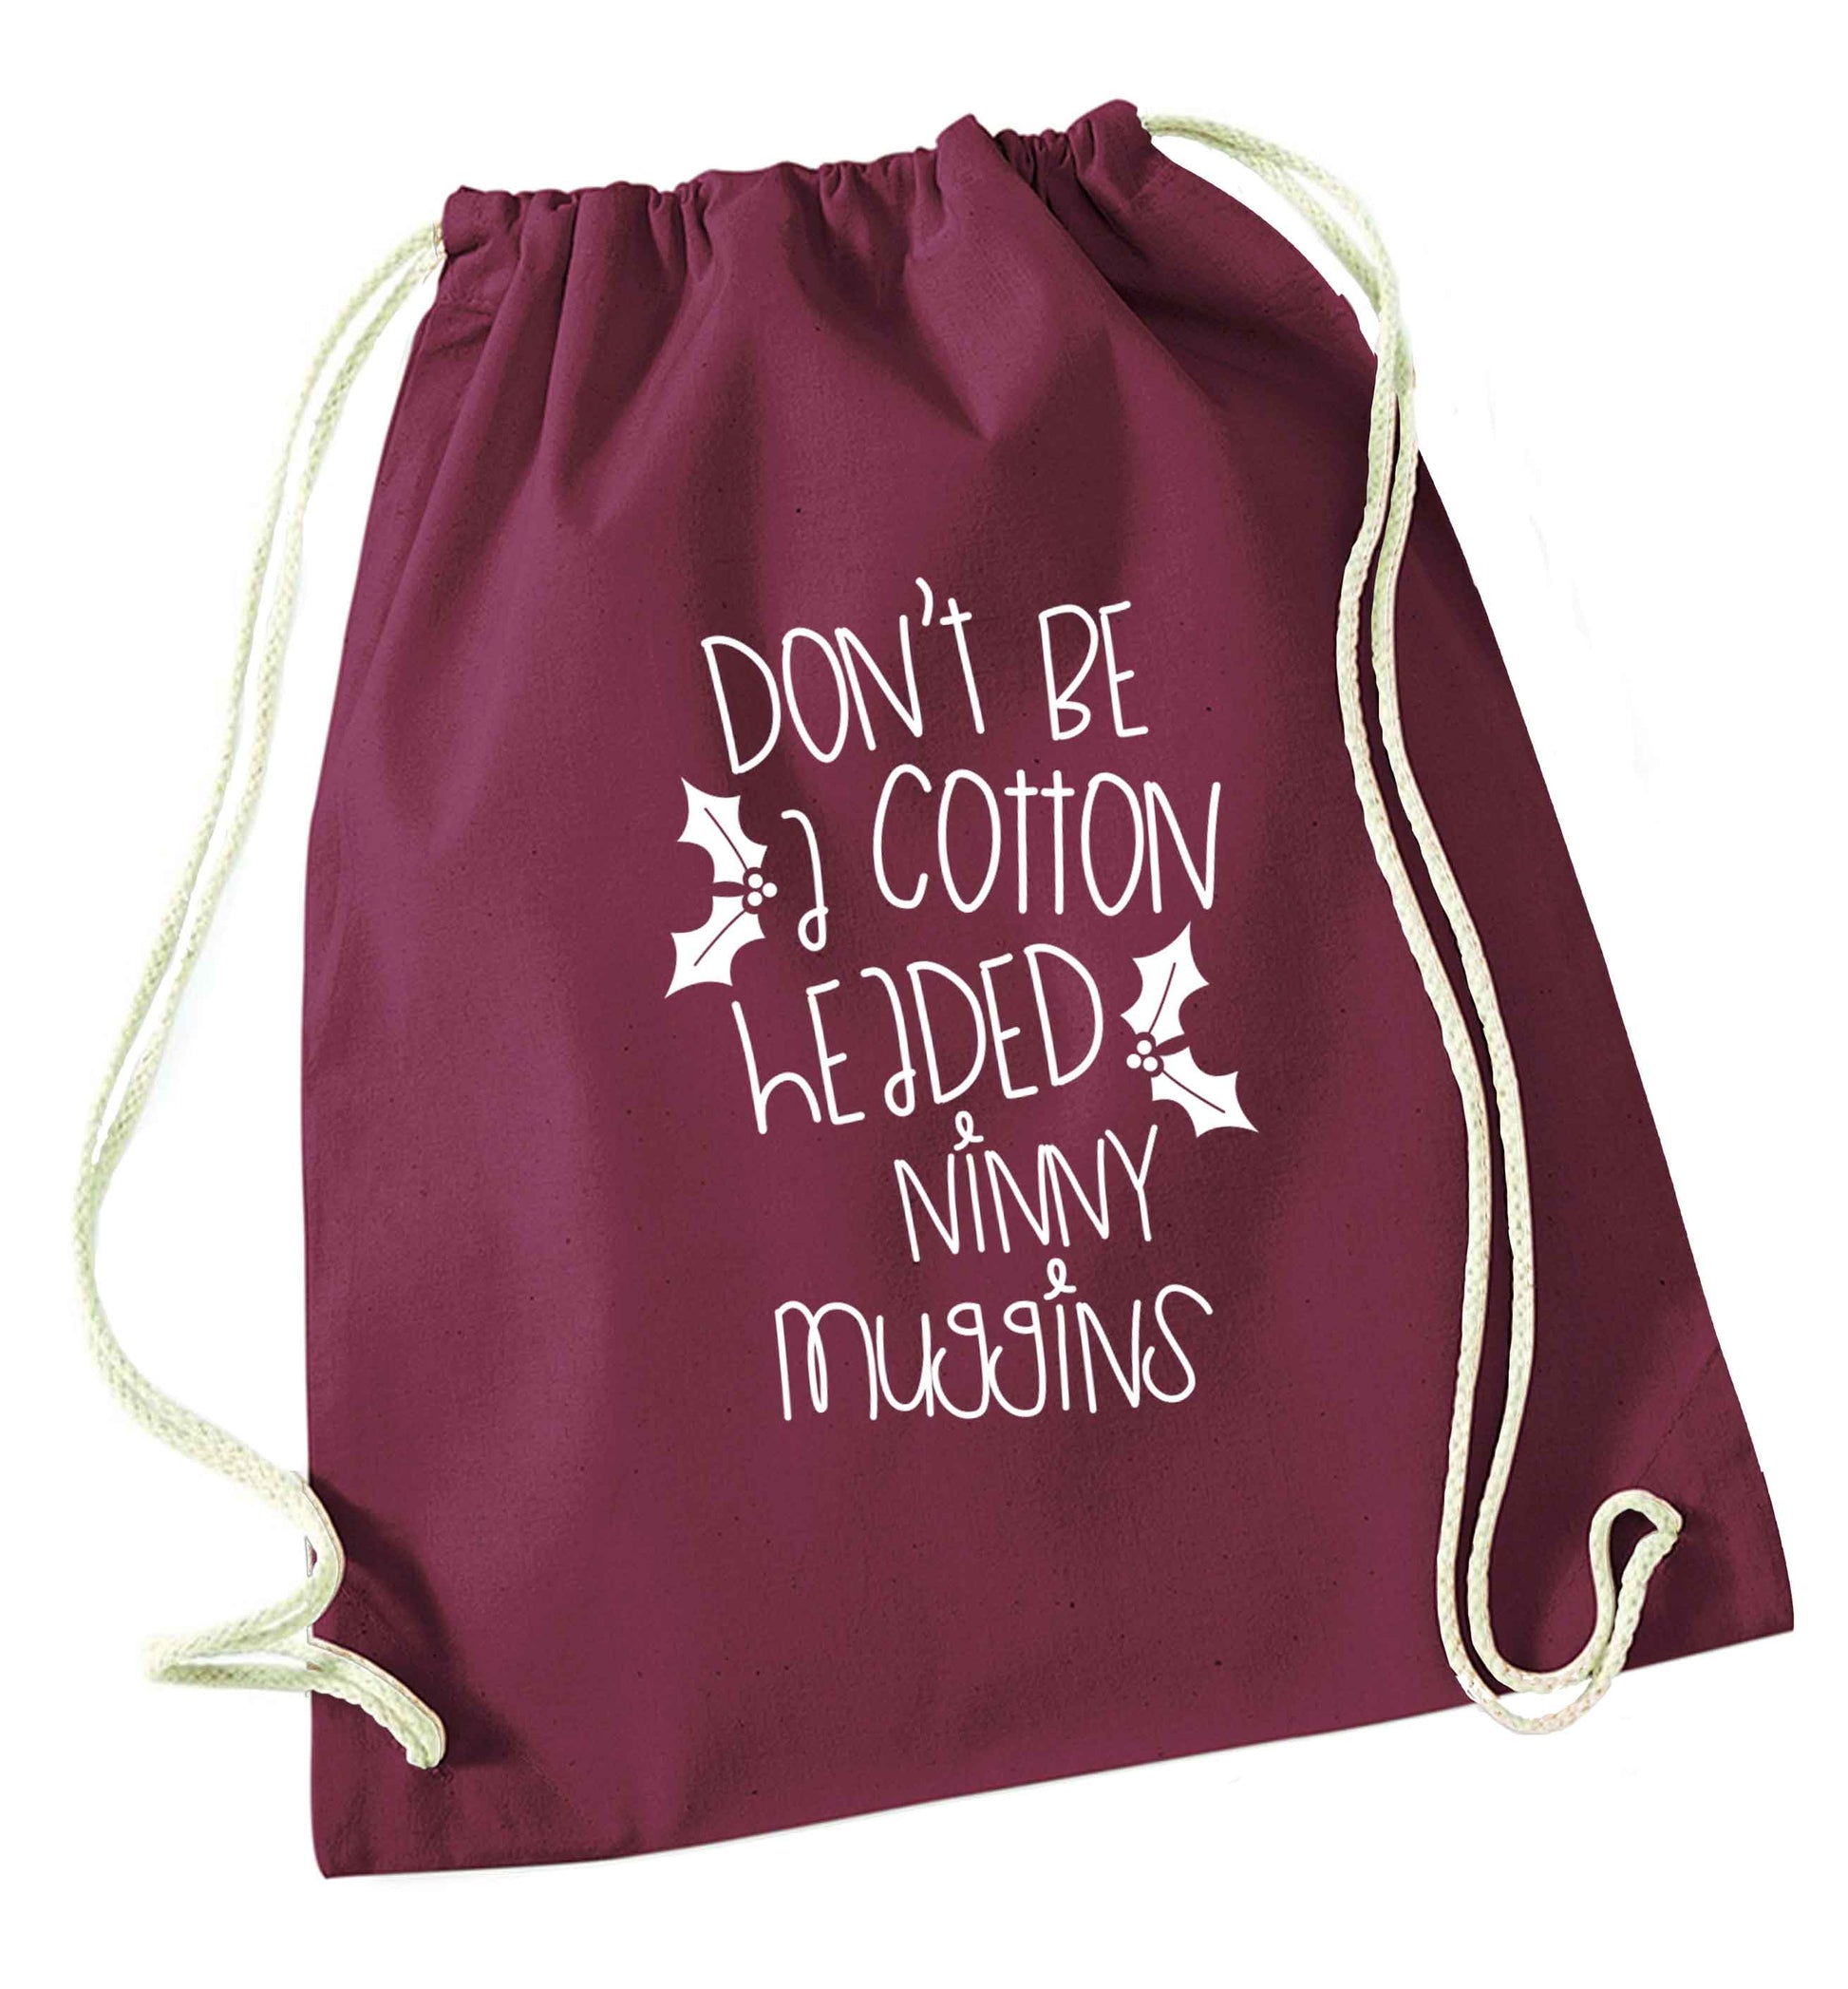 Too Late to be Good maroon drawstring bag